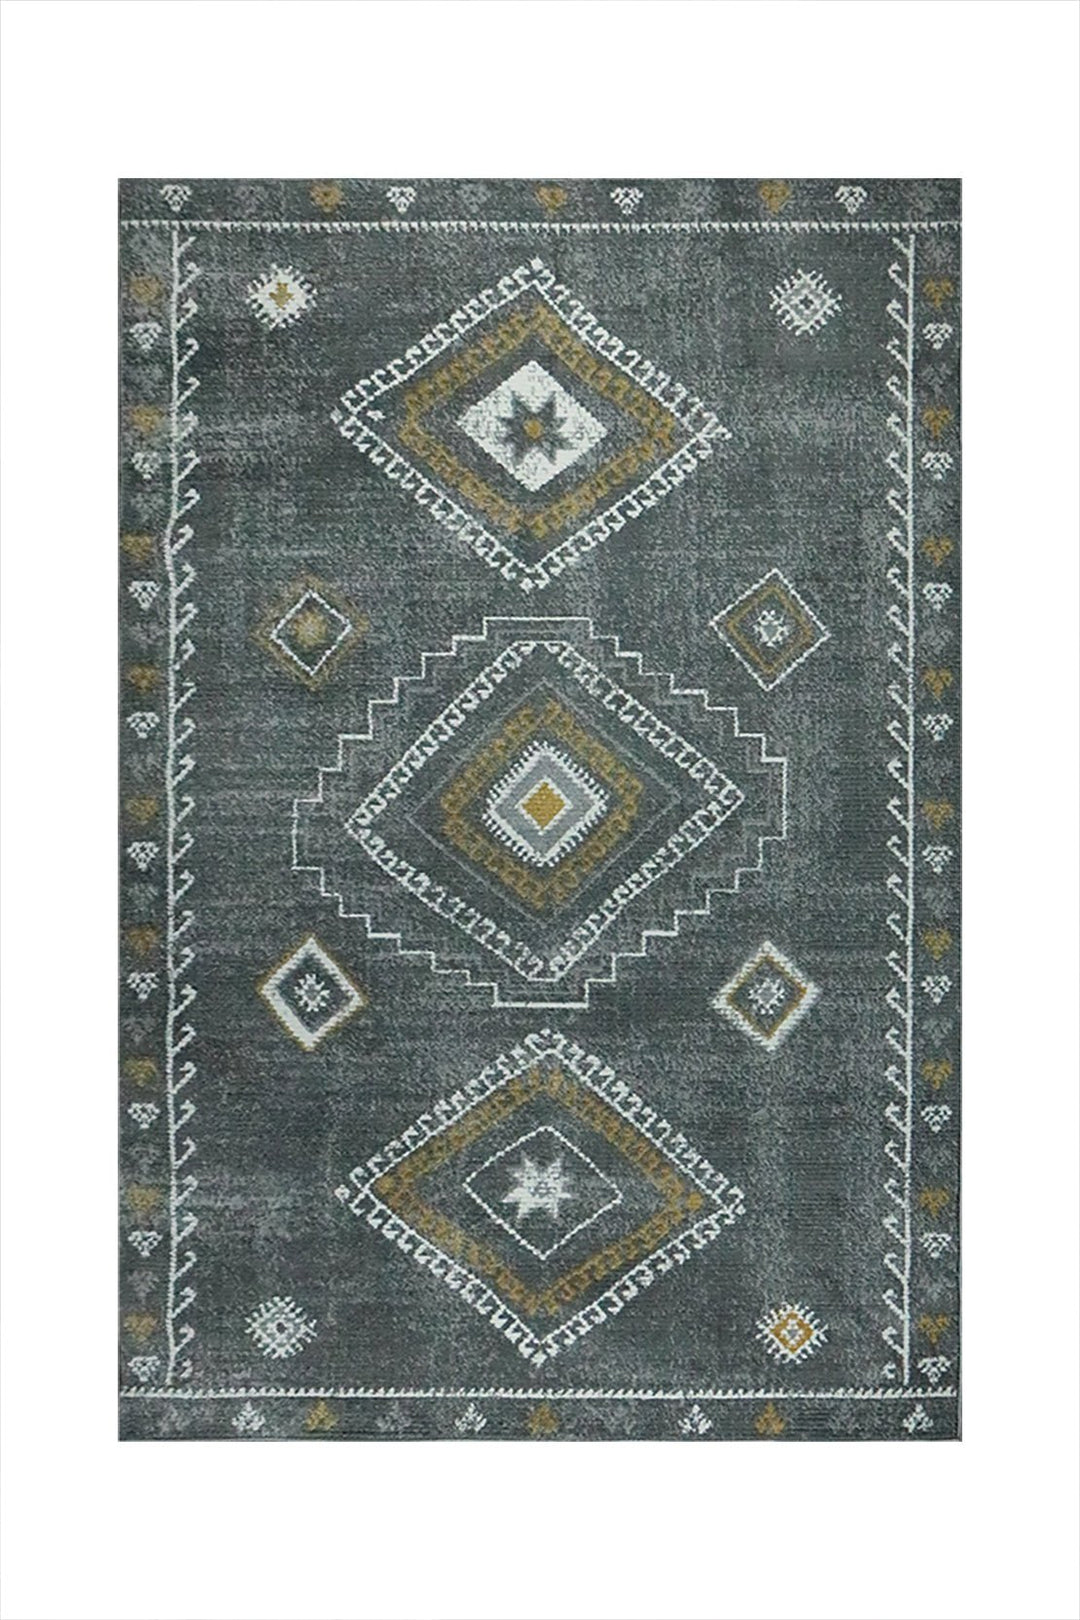 Turkish Modern Festival WD Soft Shaggy Rug - 5.2 x 7.5 FT - Gray - Sleek and Minimalist for Chic Interiors - V Surfaces